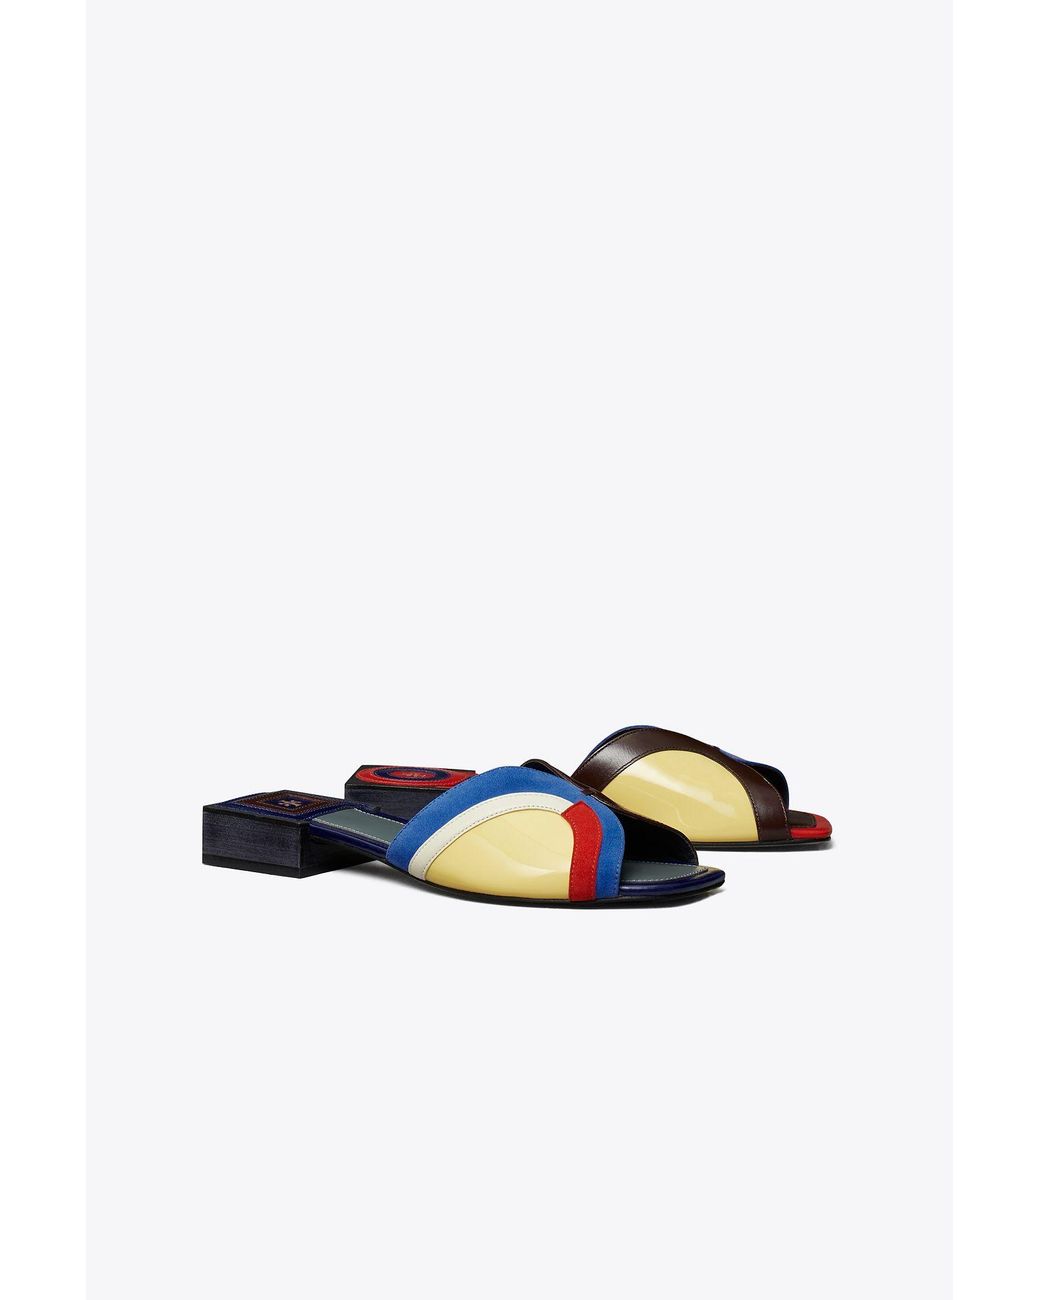 Tory Burch sandals: Shop the newest Tory Burch Marquetry Spring Sandal